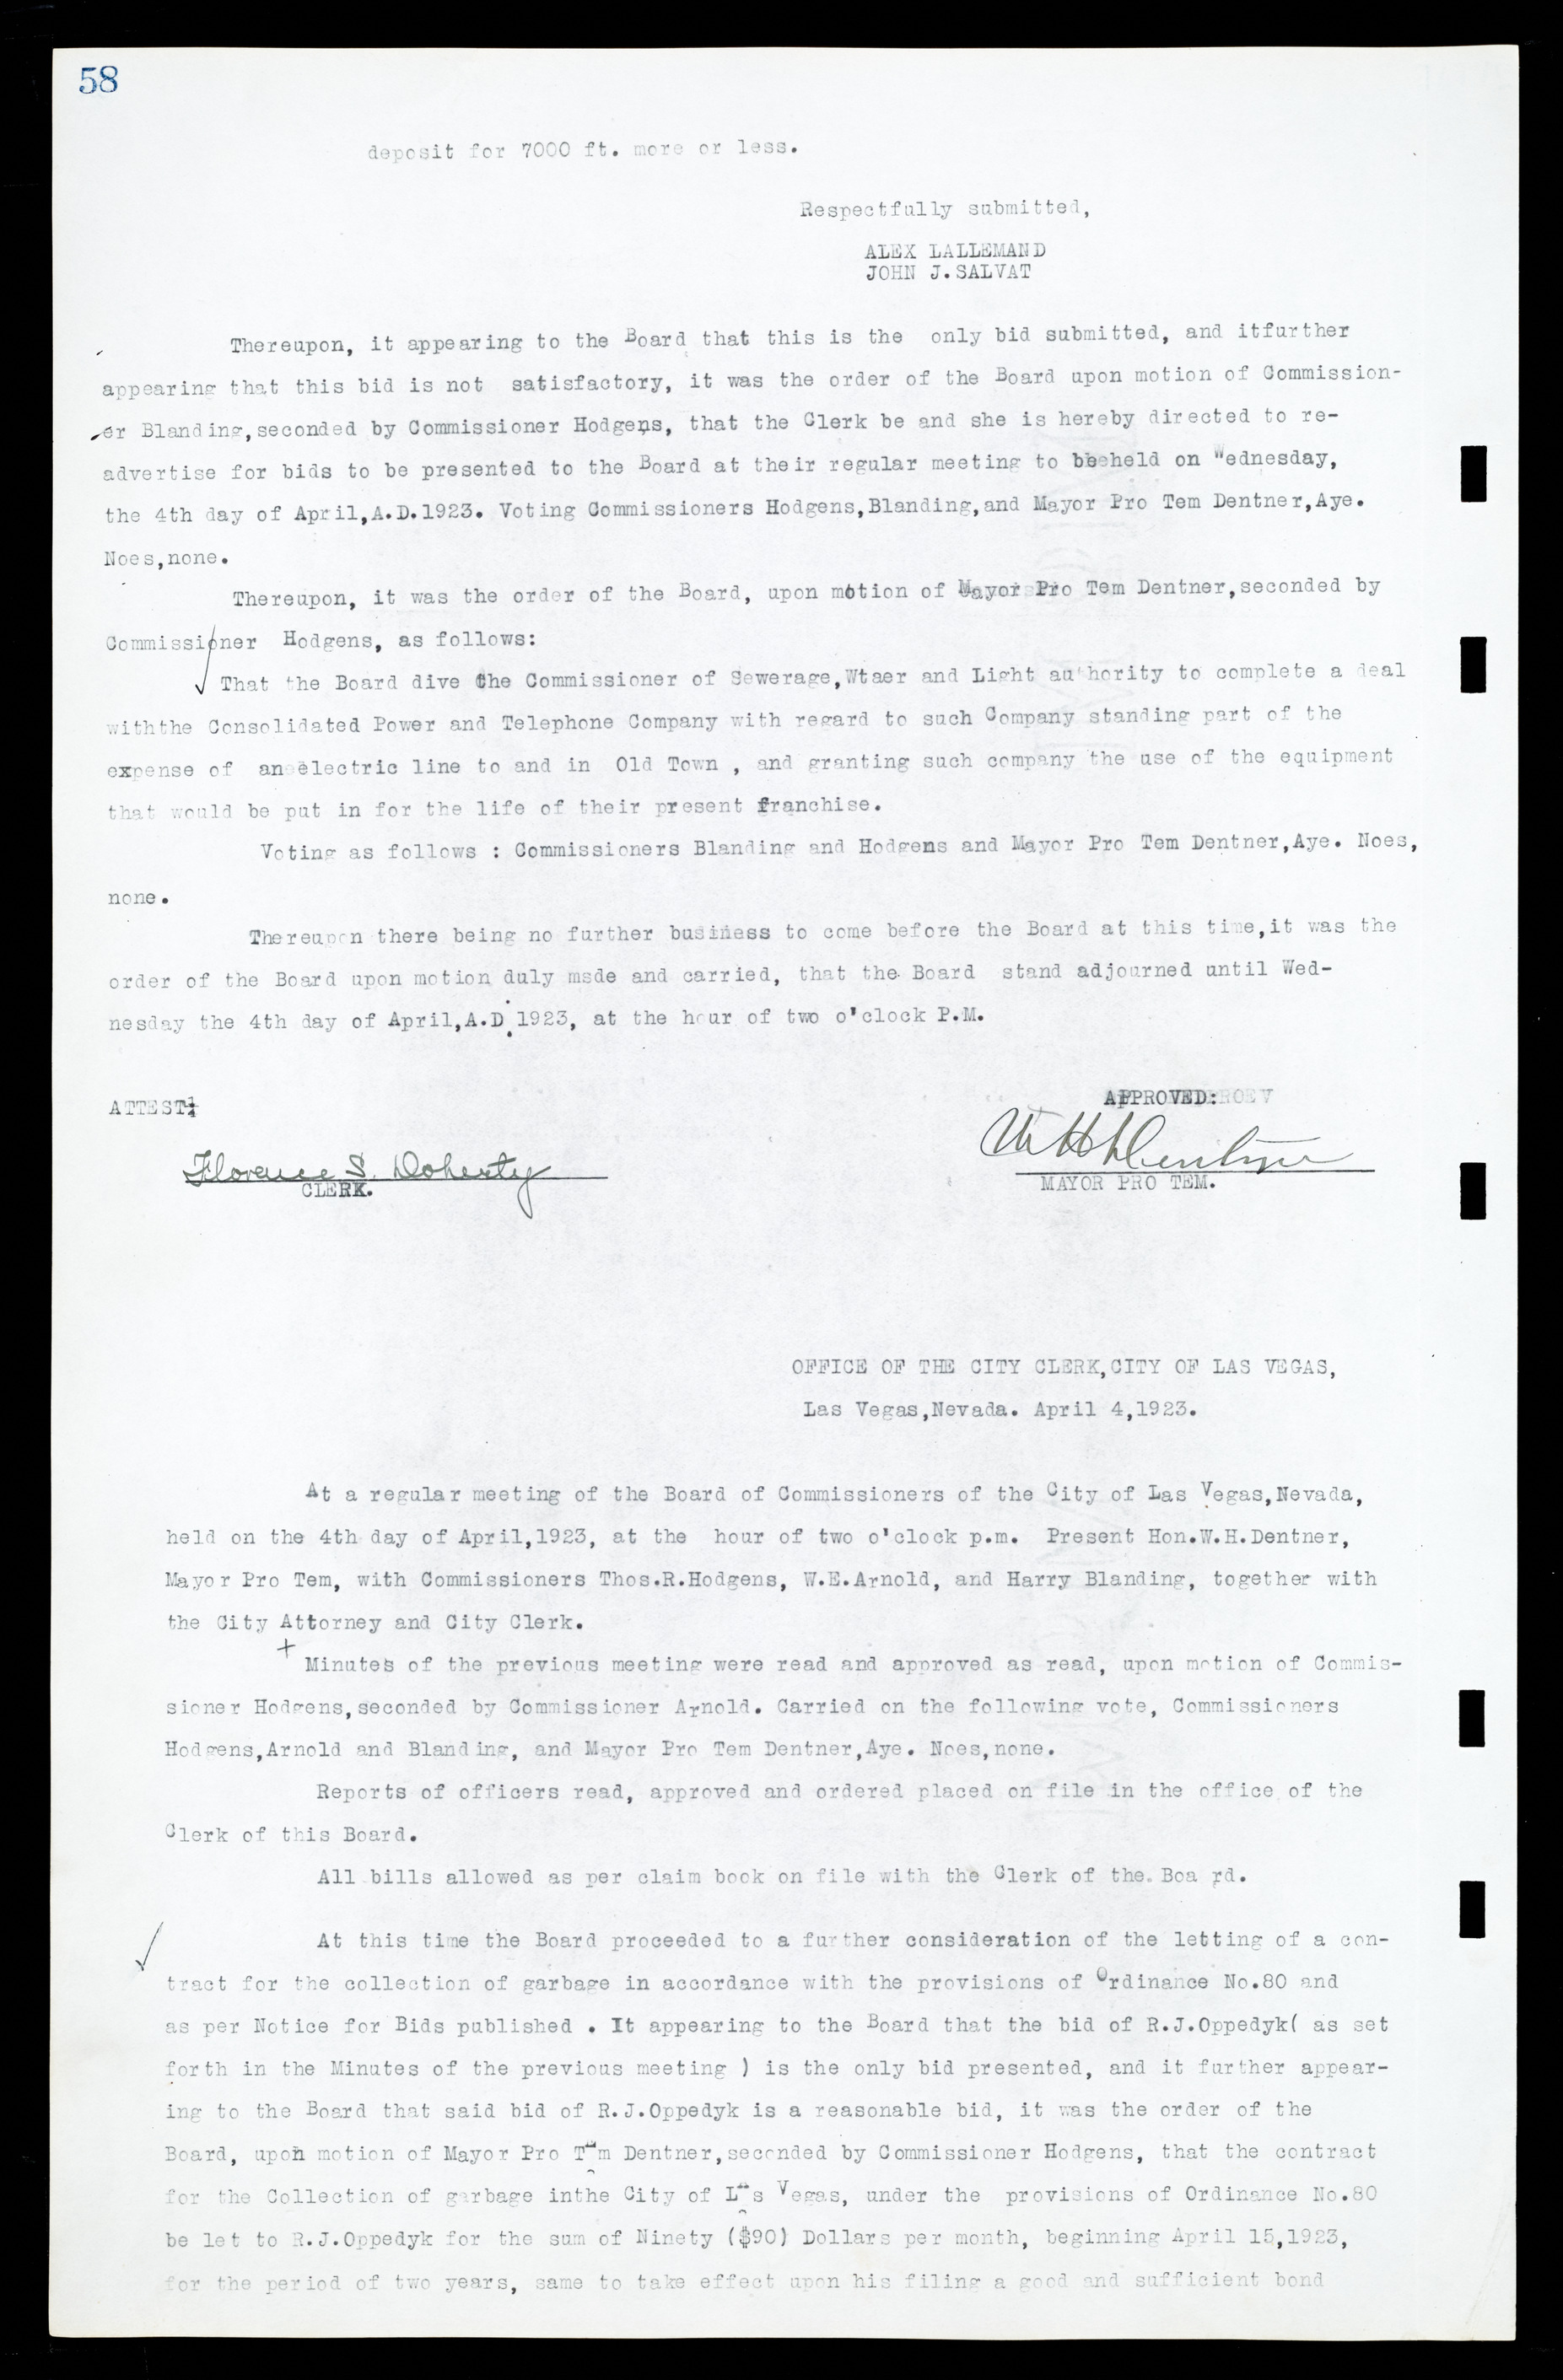 Las Vegas City Commission Minutes, March 1, 1922 to May 10, 1929, lvc000002-65